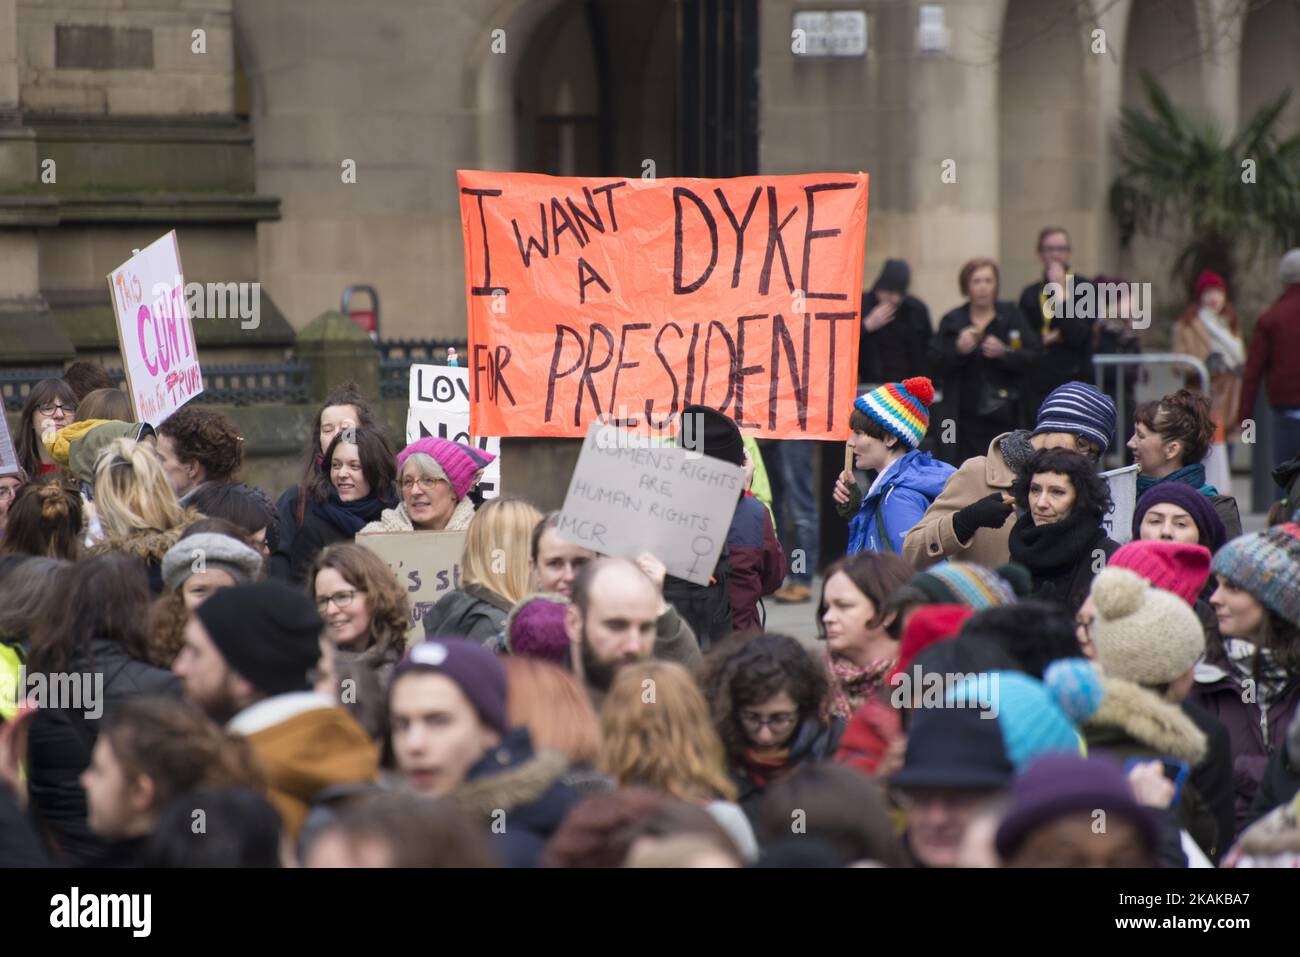 People participate in a 'Stop Trump' demonstration on Saturday Jan. 21, 2017 in Manchester, United Kingdom. The demonstration, which happened in solidarity with other demonstrations in other cities, called for change of POTUS from President Trump the day after President Trump's inauguration. (Photo by Jonathan Nicholson/NurPhoto) *** Please Use Credit from Credit Field *** Stock Photo